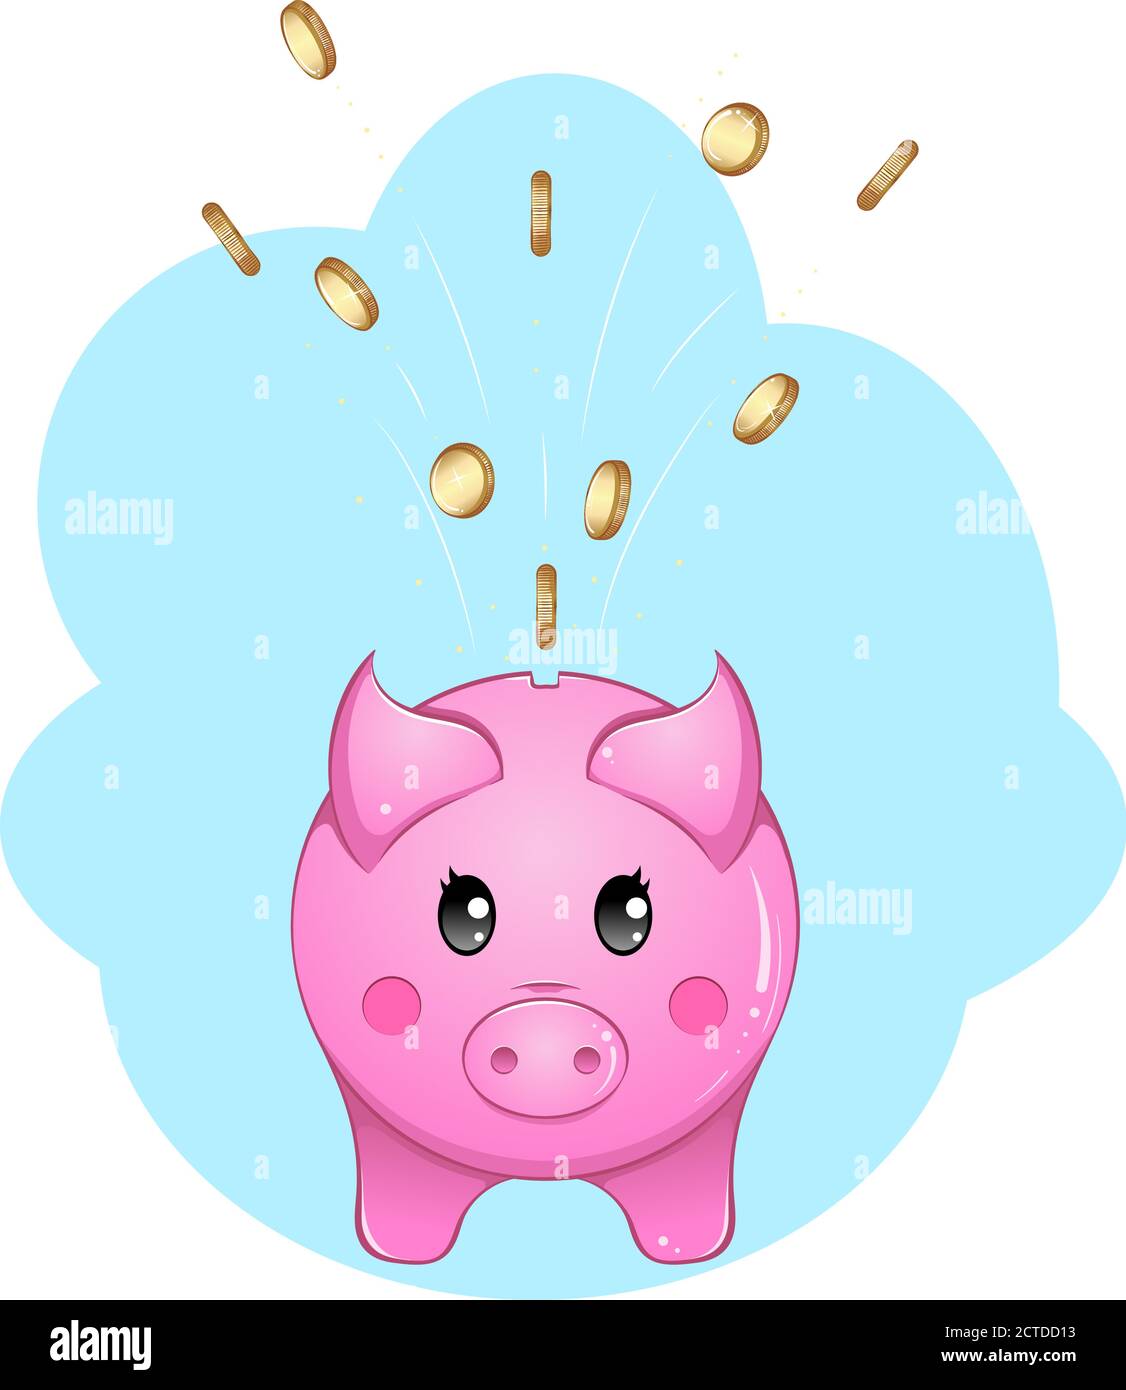 Cute piggy bank with coins a front view. Conceptual symbol of saving money. Hand drawn illustration isolated on white background. Vector icon. Design element for banking, deposit, financial sign. Stock Vector